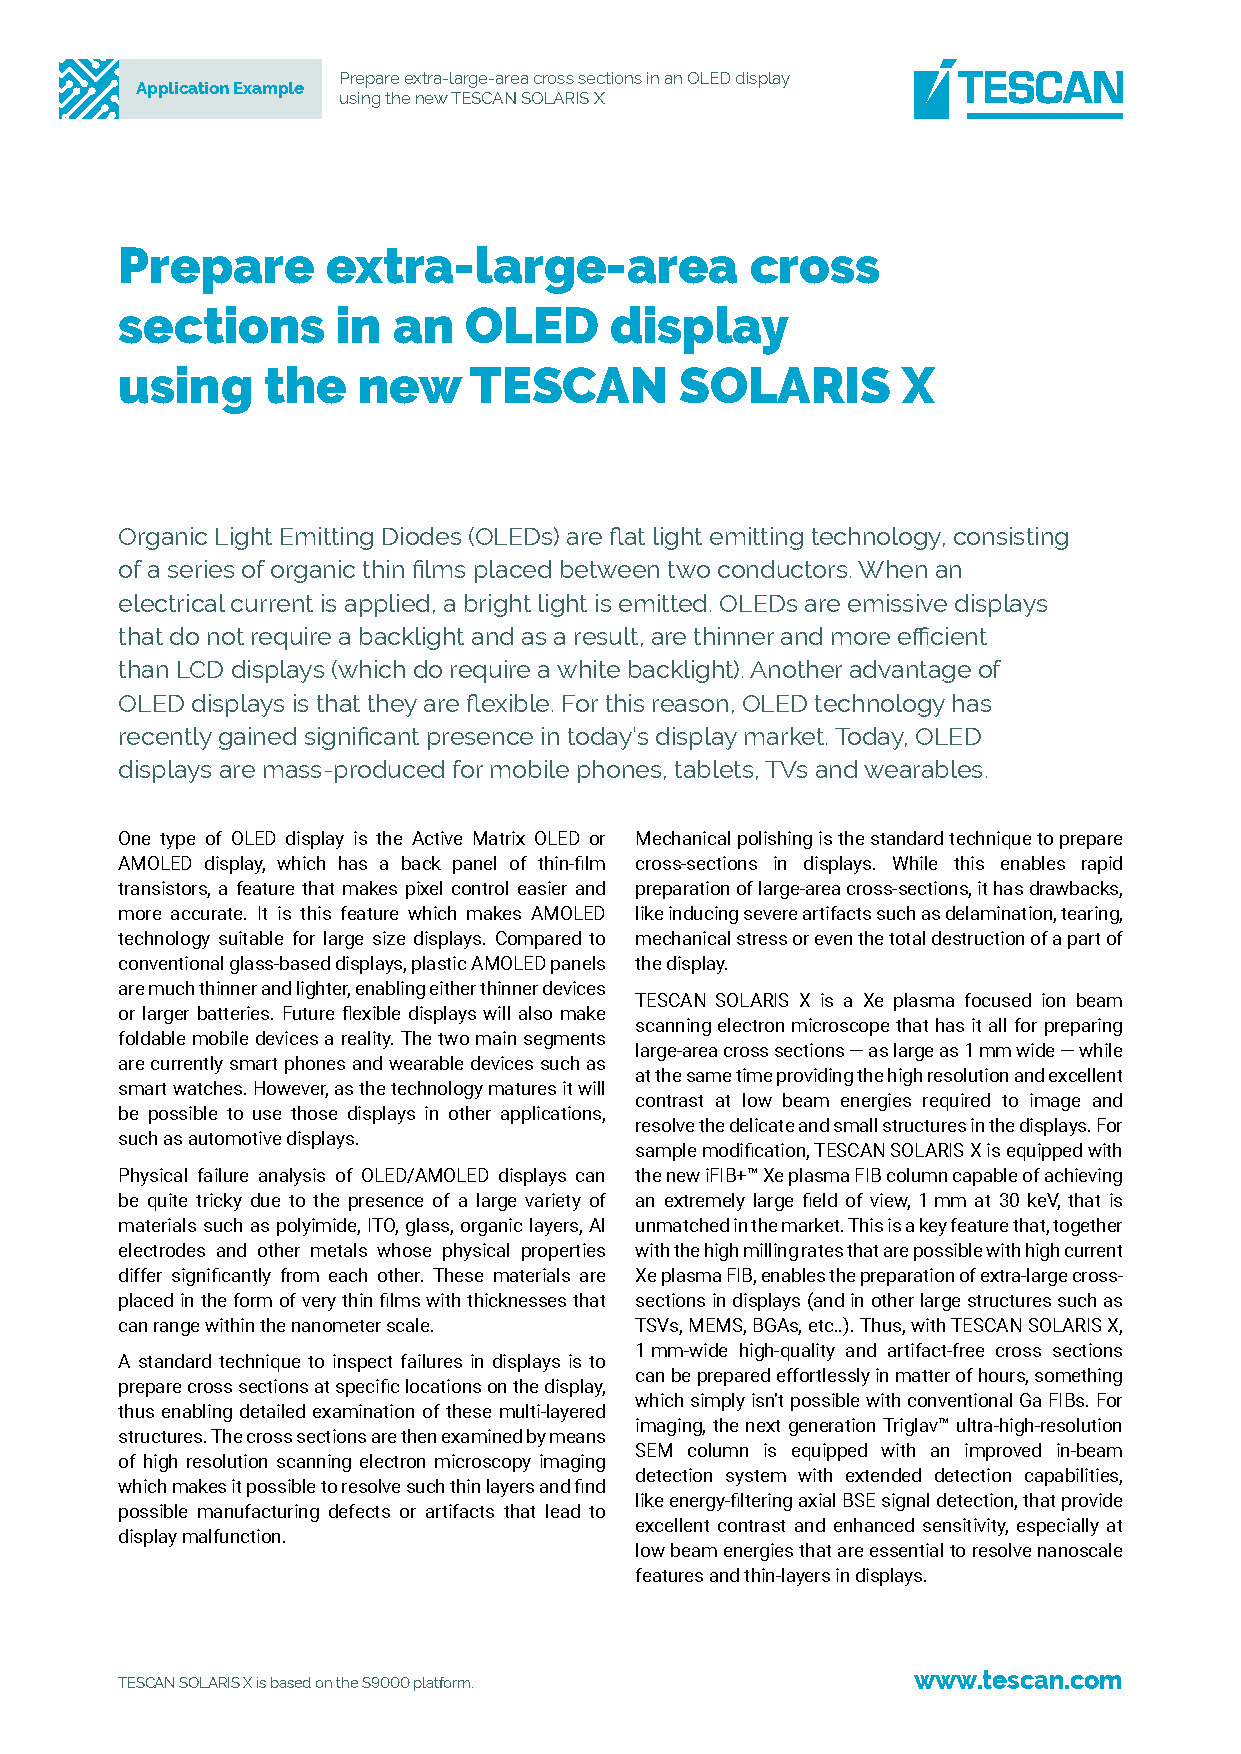 Extra-large-area-cross-sections-in-an-OLED-display_Page_1